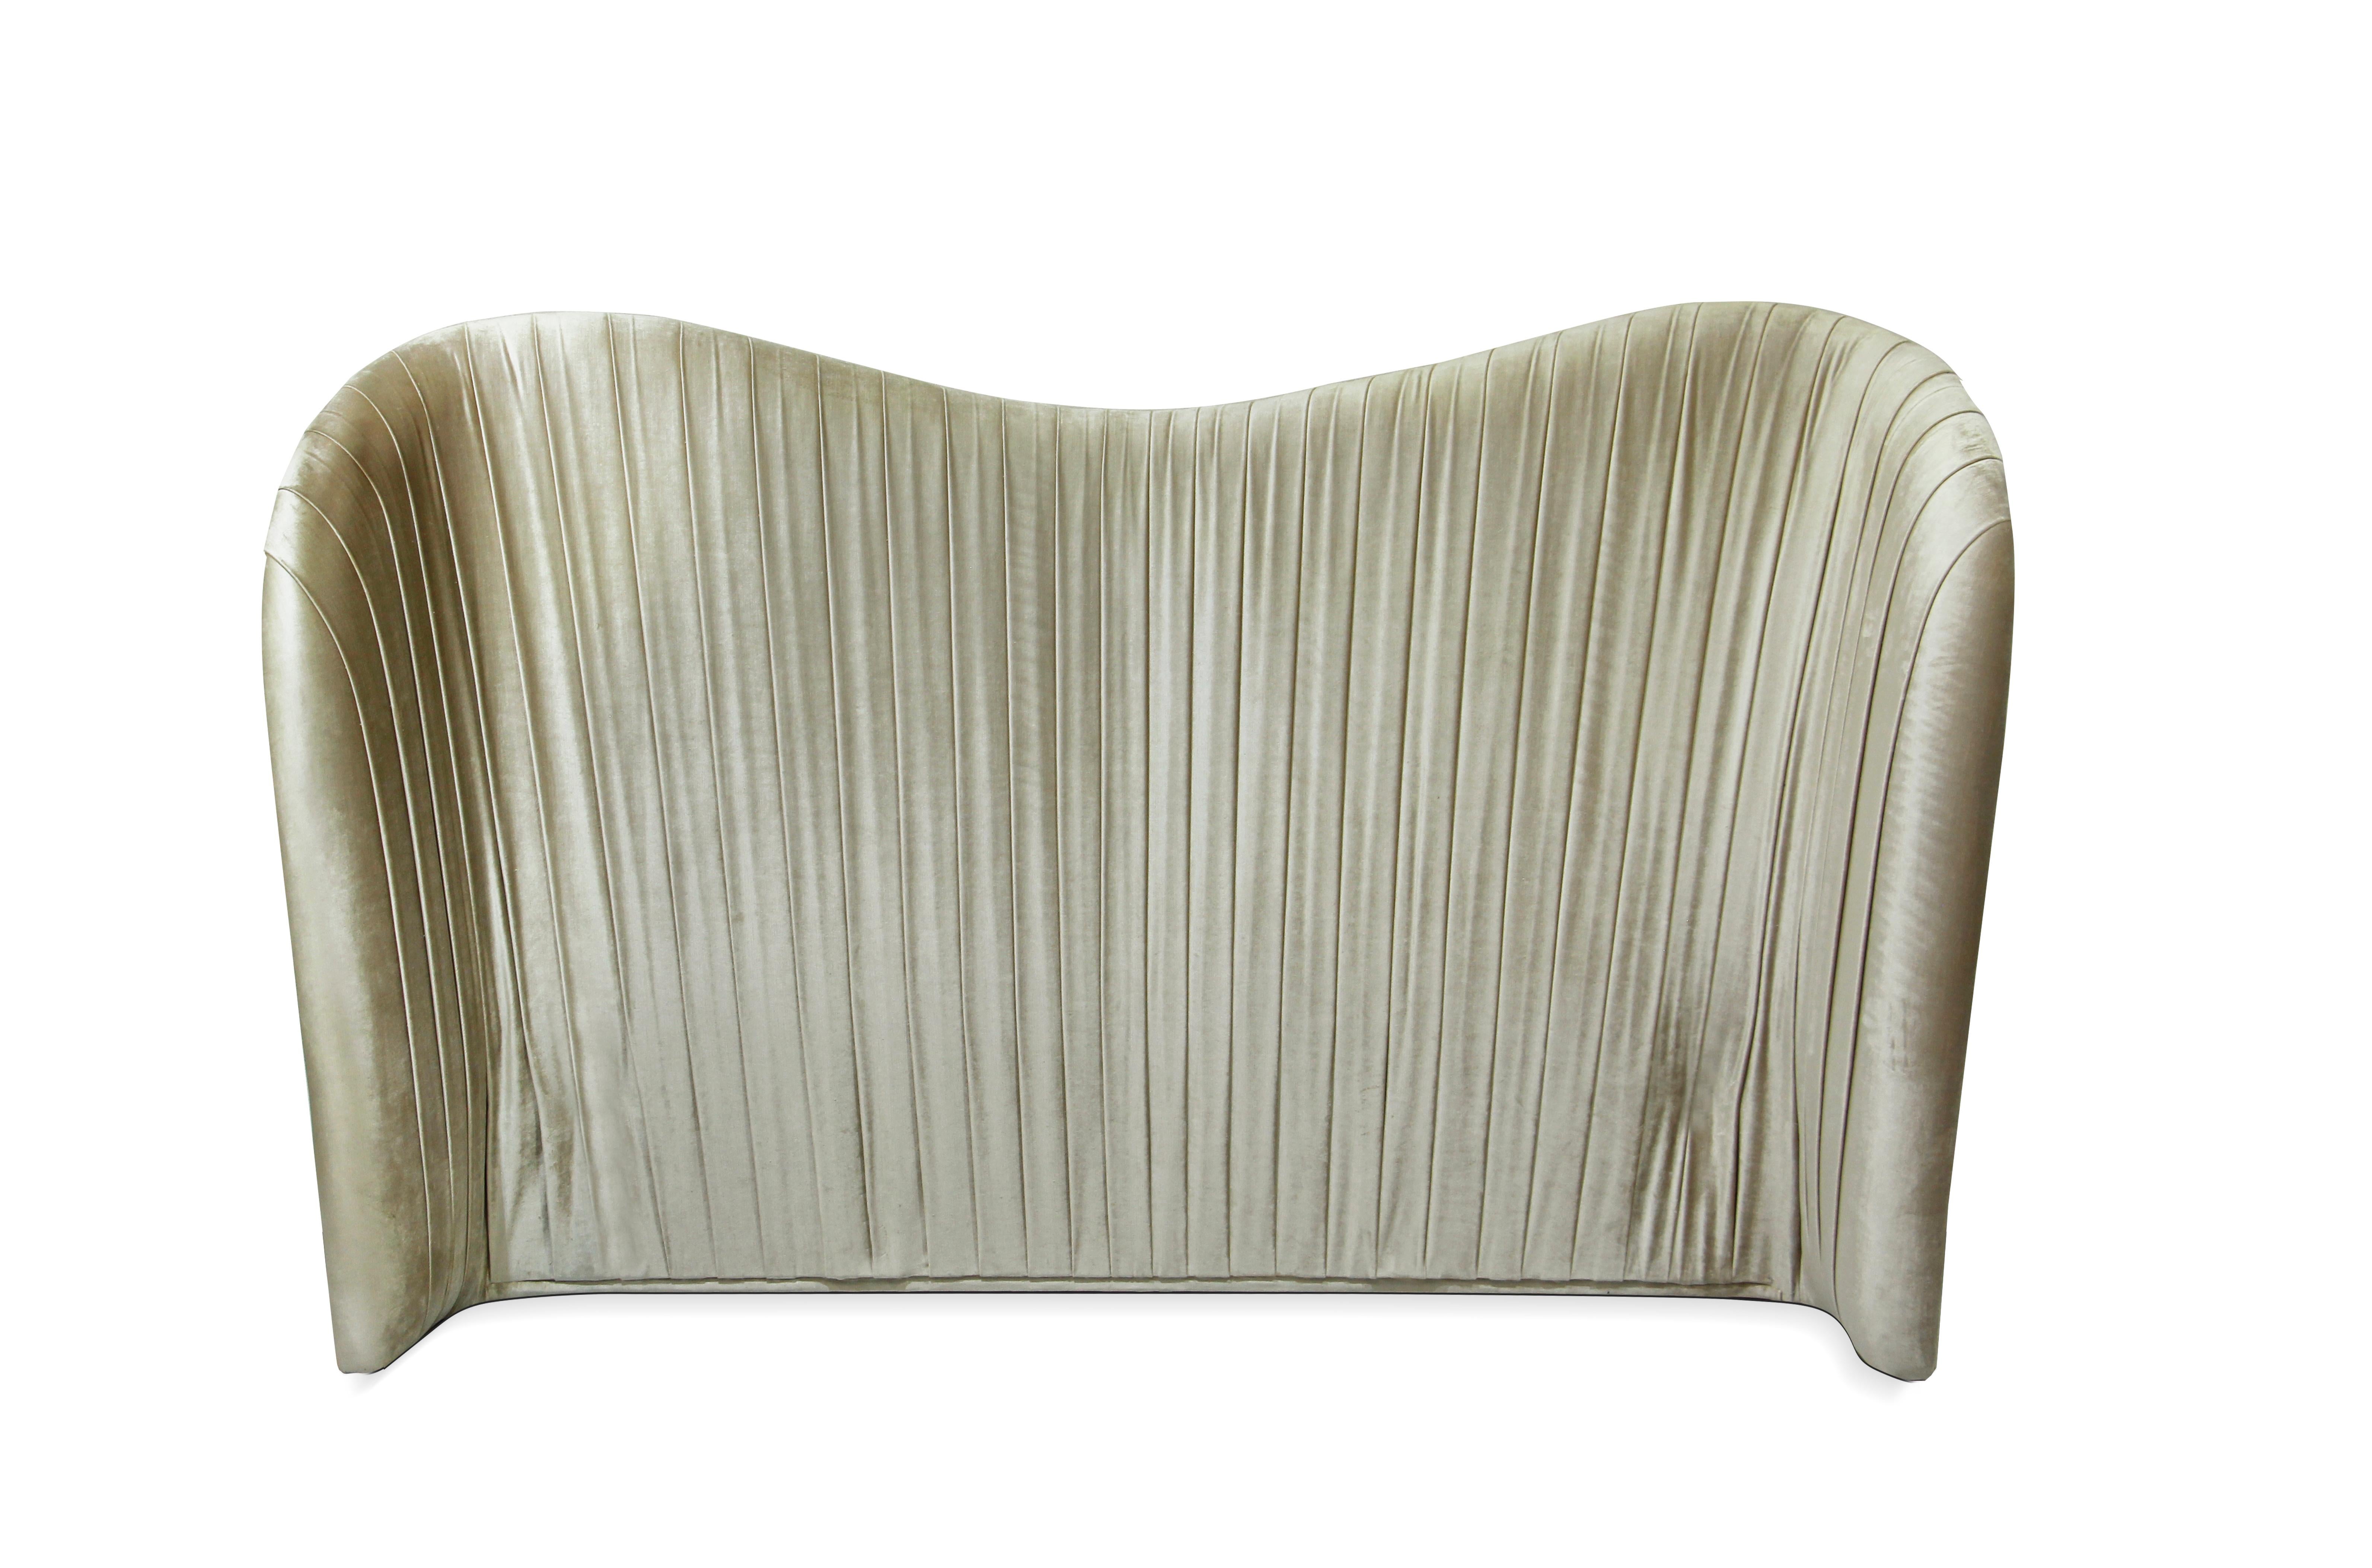 The lux and bodacious Kelly bed is the cool girl sipping Cosmos in the dark corner of a chic NYC lounge. Her fluid curves are harmoniously matched by sumptuous pleated waves of supple velvet upholstery fabric. You'll be dying to get up close and